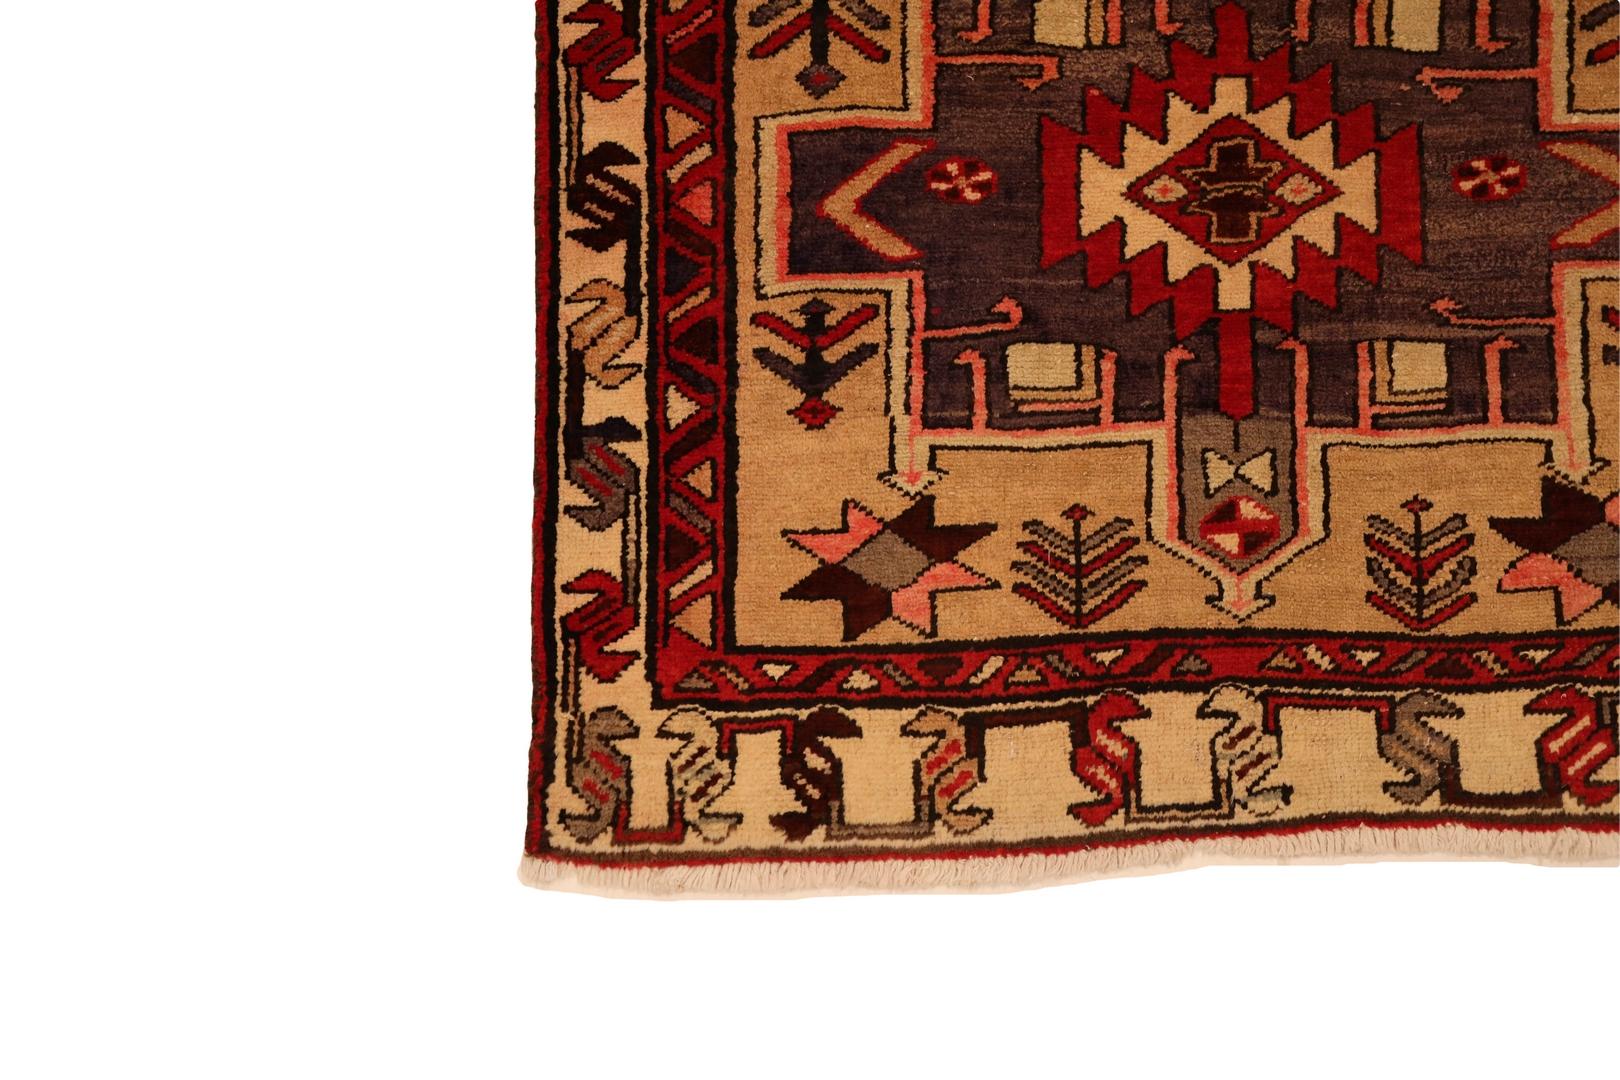 can you write me a rug description for a north west persian runner. The runner has a deep beige background with medallions in purple red and ivory. The medallions share the same geometric 8 sided shape with a jagged wide hexagon medallion in the